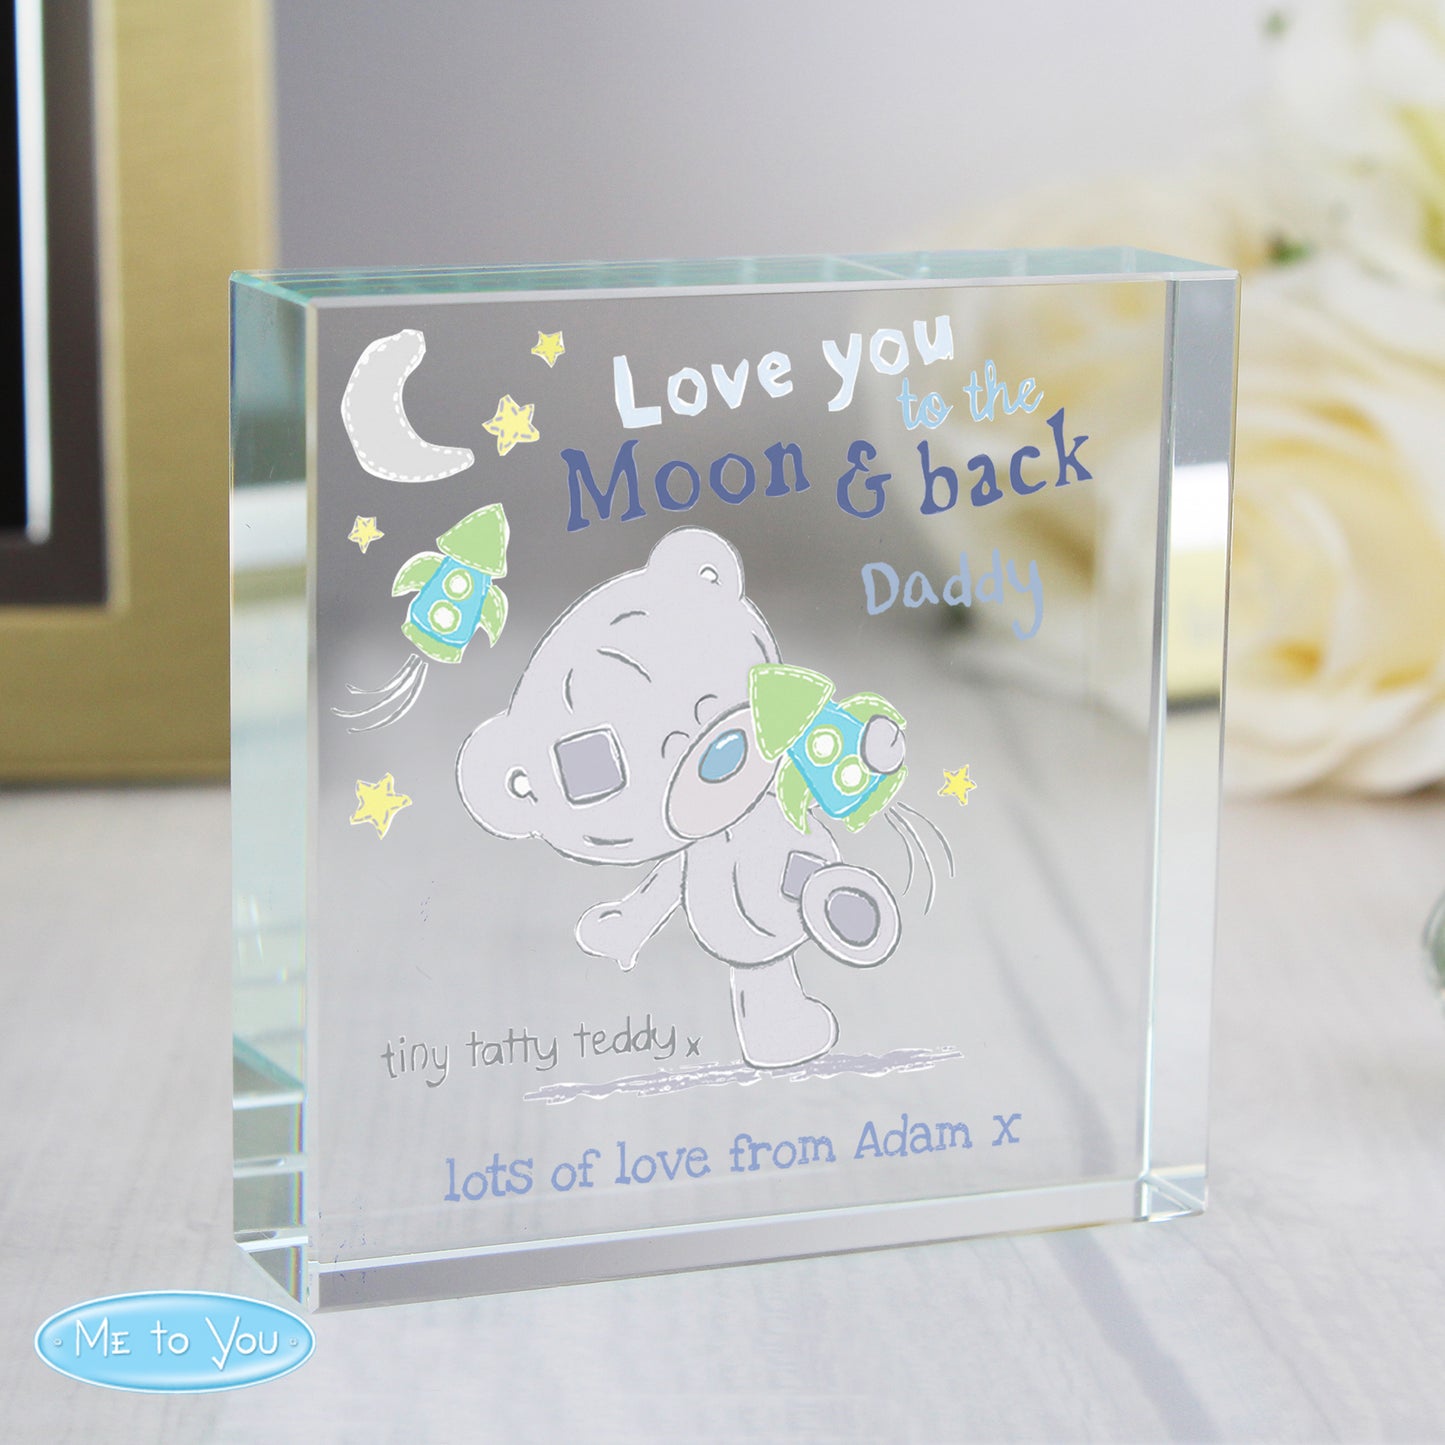 Personalised Tiny Tatty Teddy To the Moon & Back Large Crystal Token